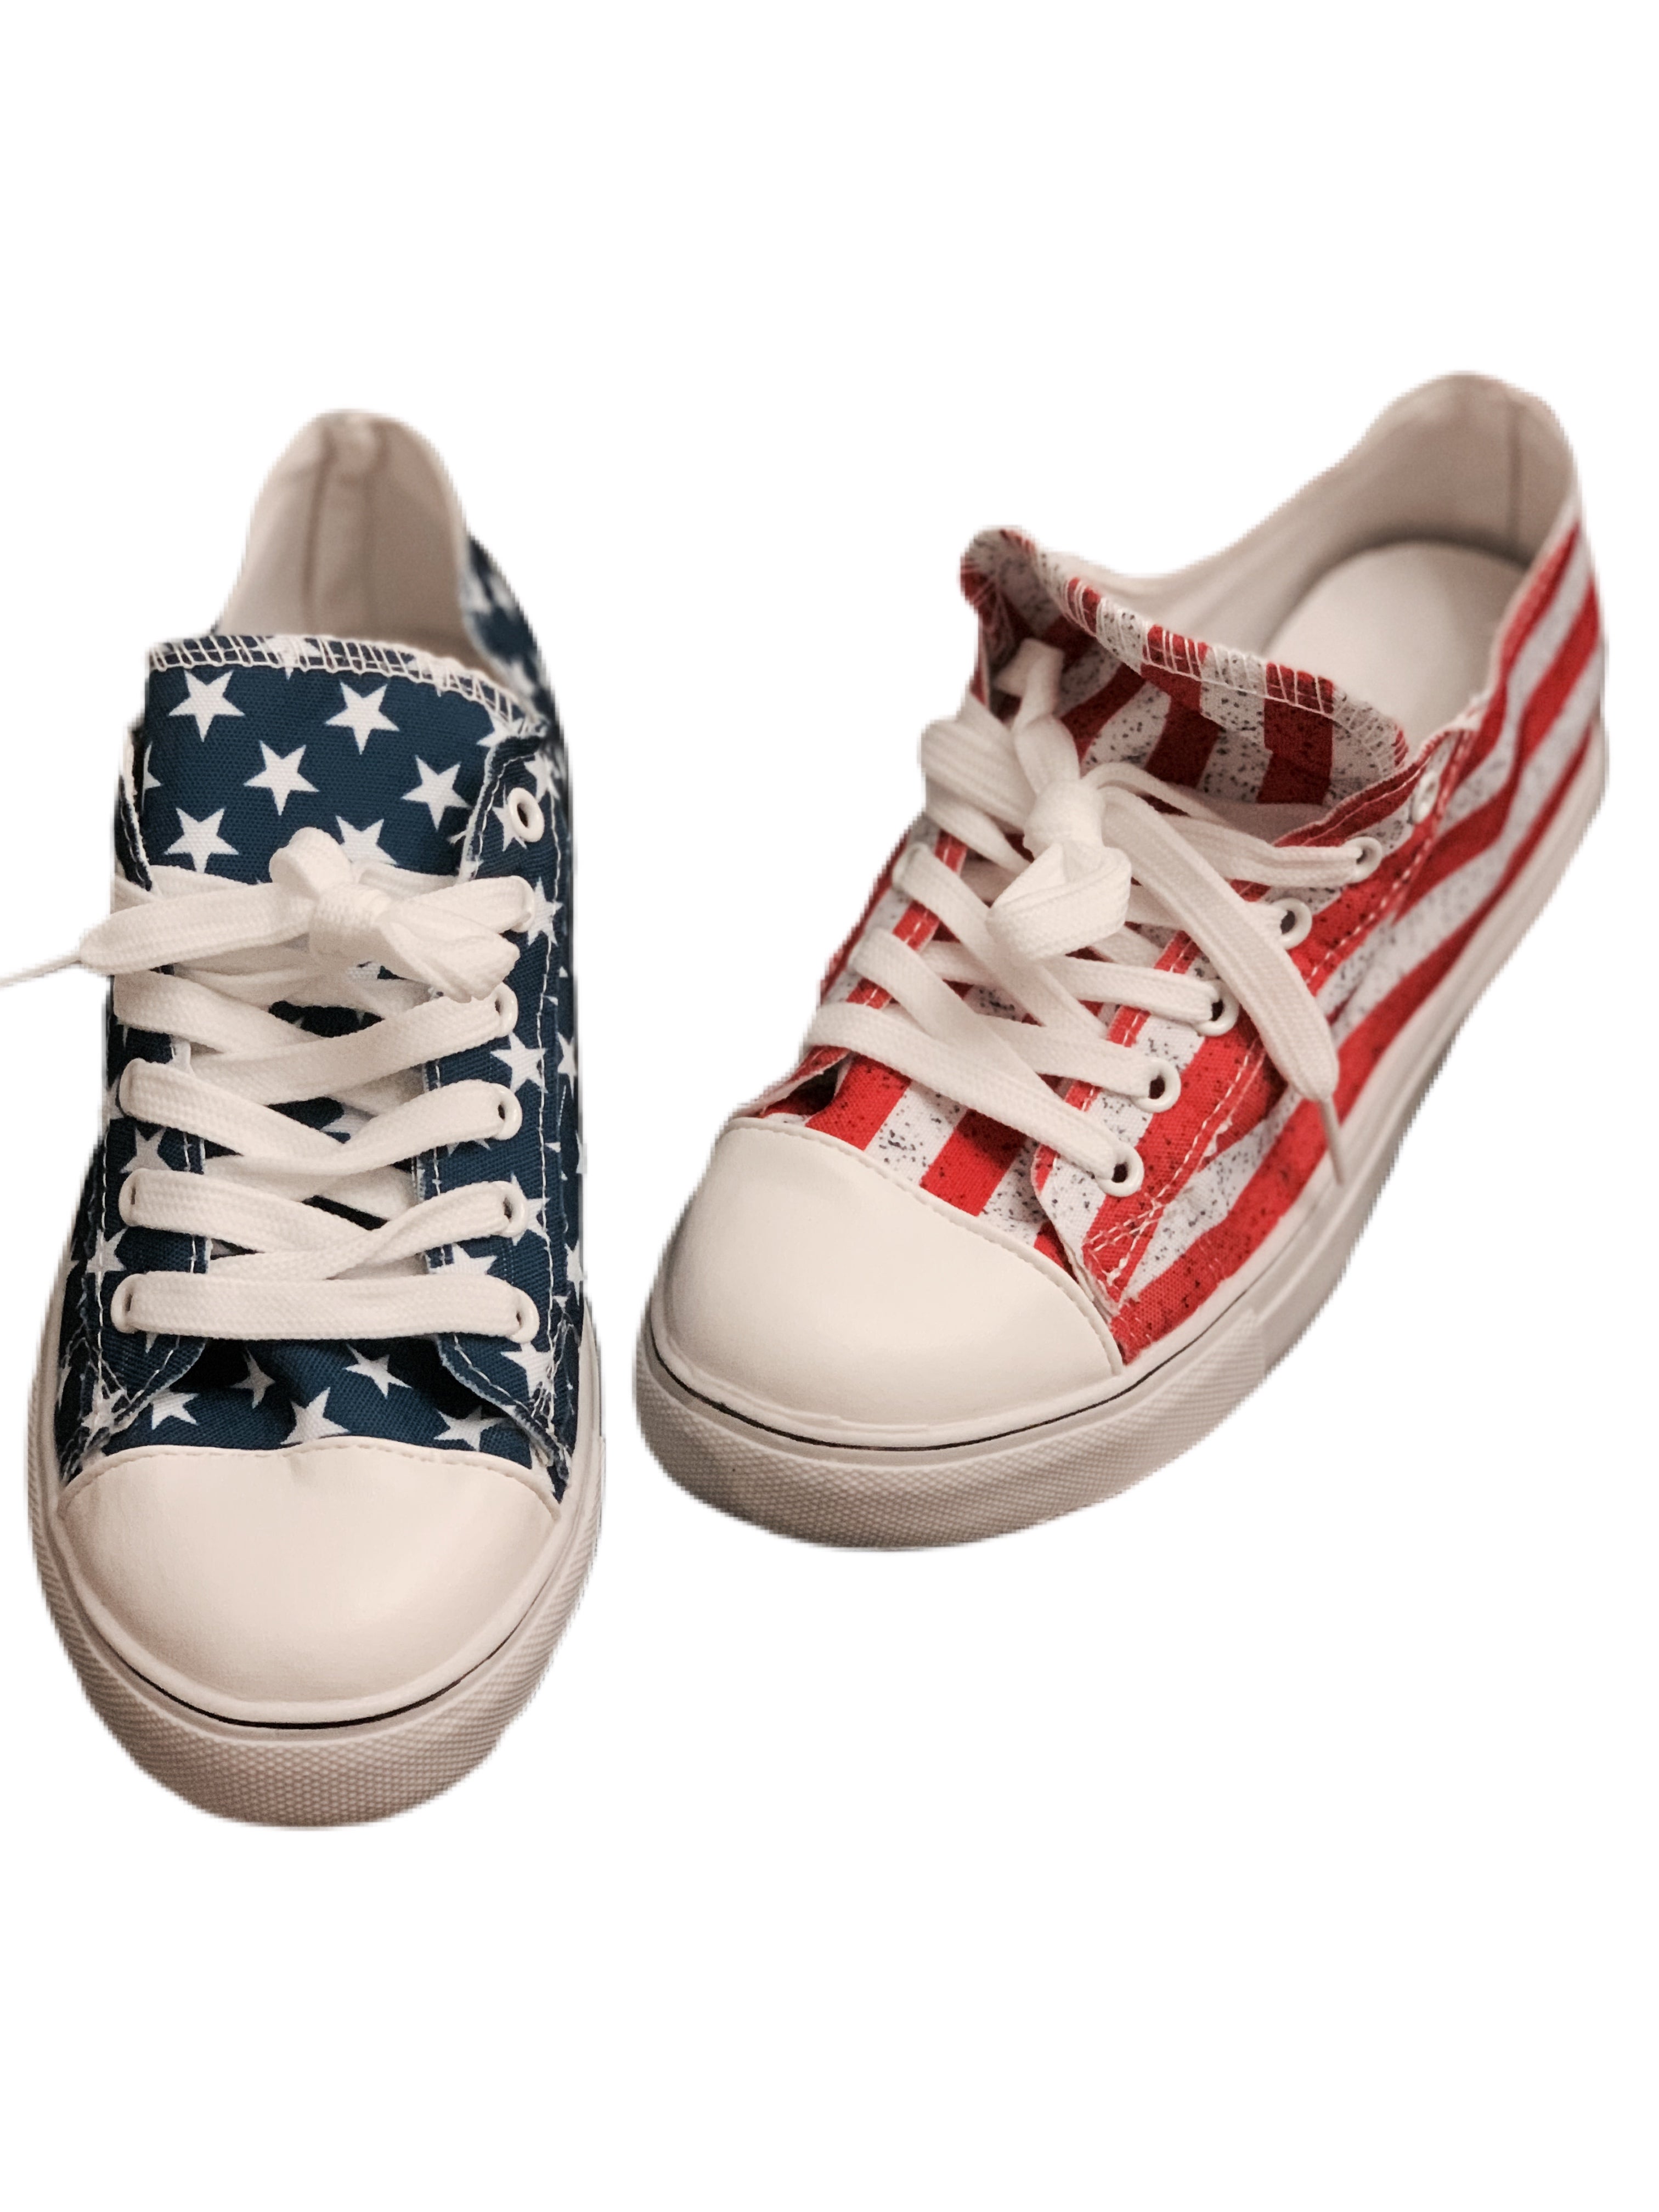 American flag print sneakers.  Comfy insoles, rubber bottom, tie canvas sneaker.  Runs True To Size.  Super nice sneakers! So cute and patriotic also!! 